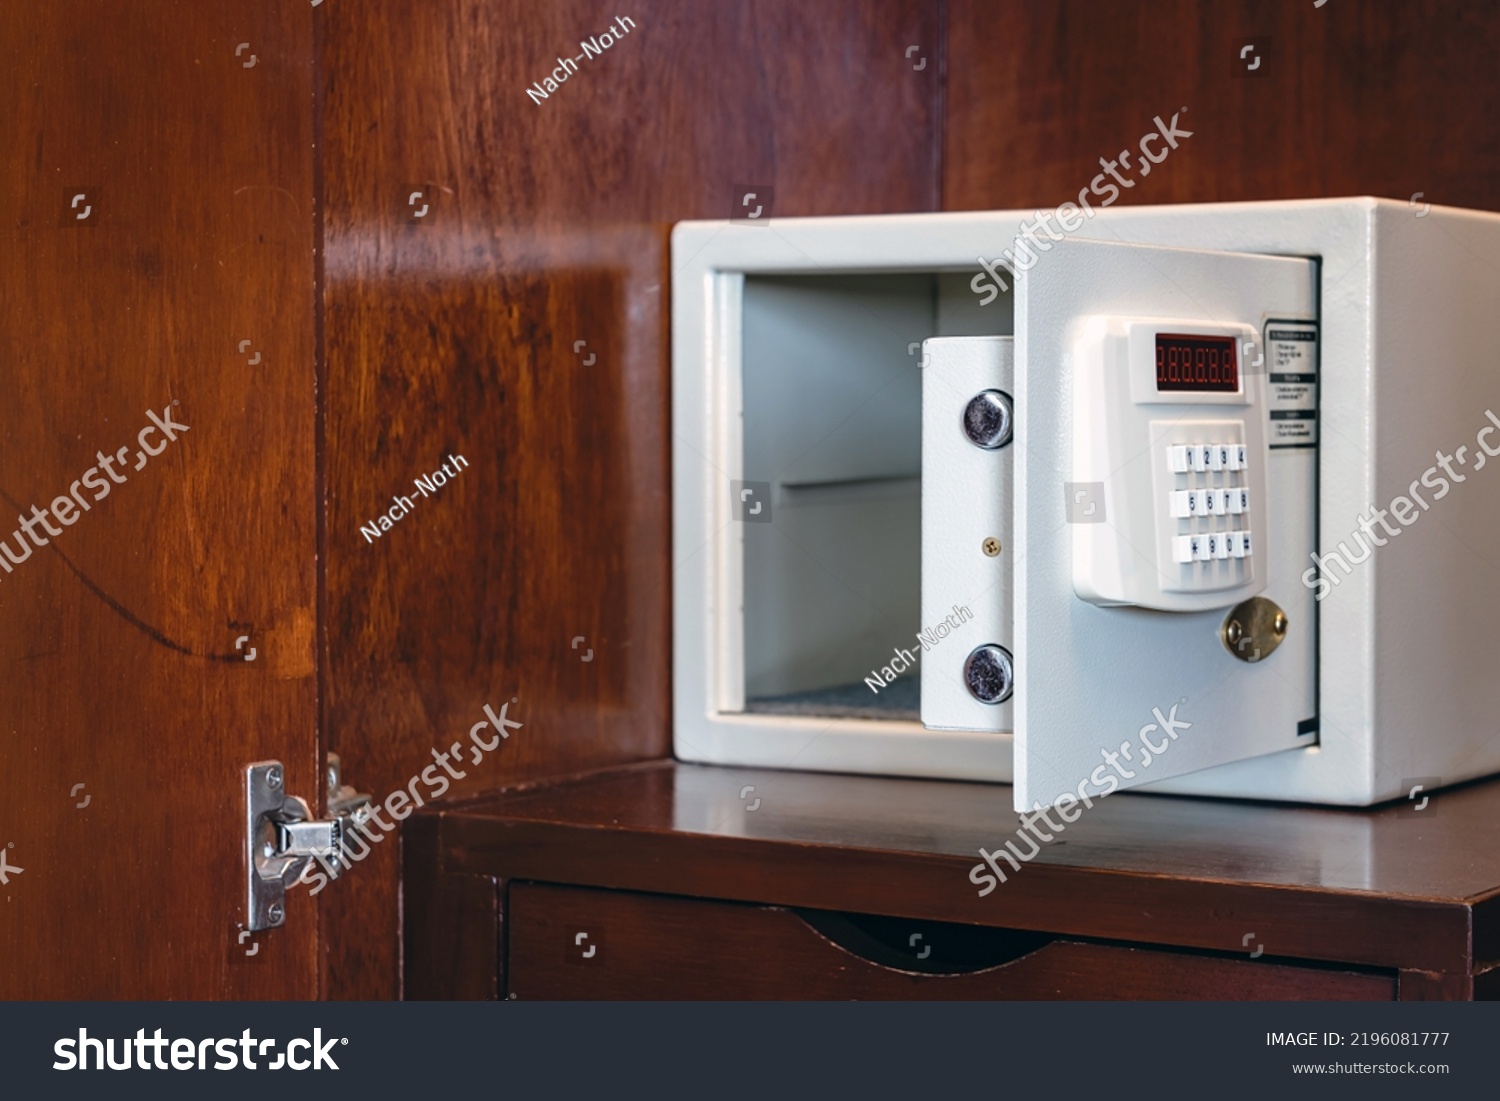 Security open metal safe with empty space inside in a wooden shelf. White safe box open door. Safe box with electronic lock in the hotel or home. Selective Focus on locking mechanism of small safes. #2196081777